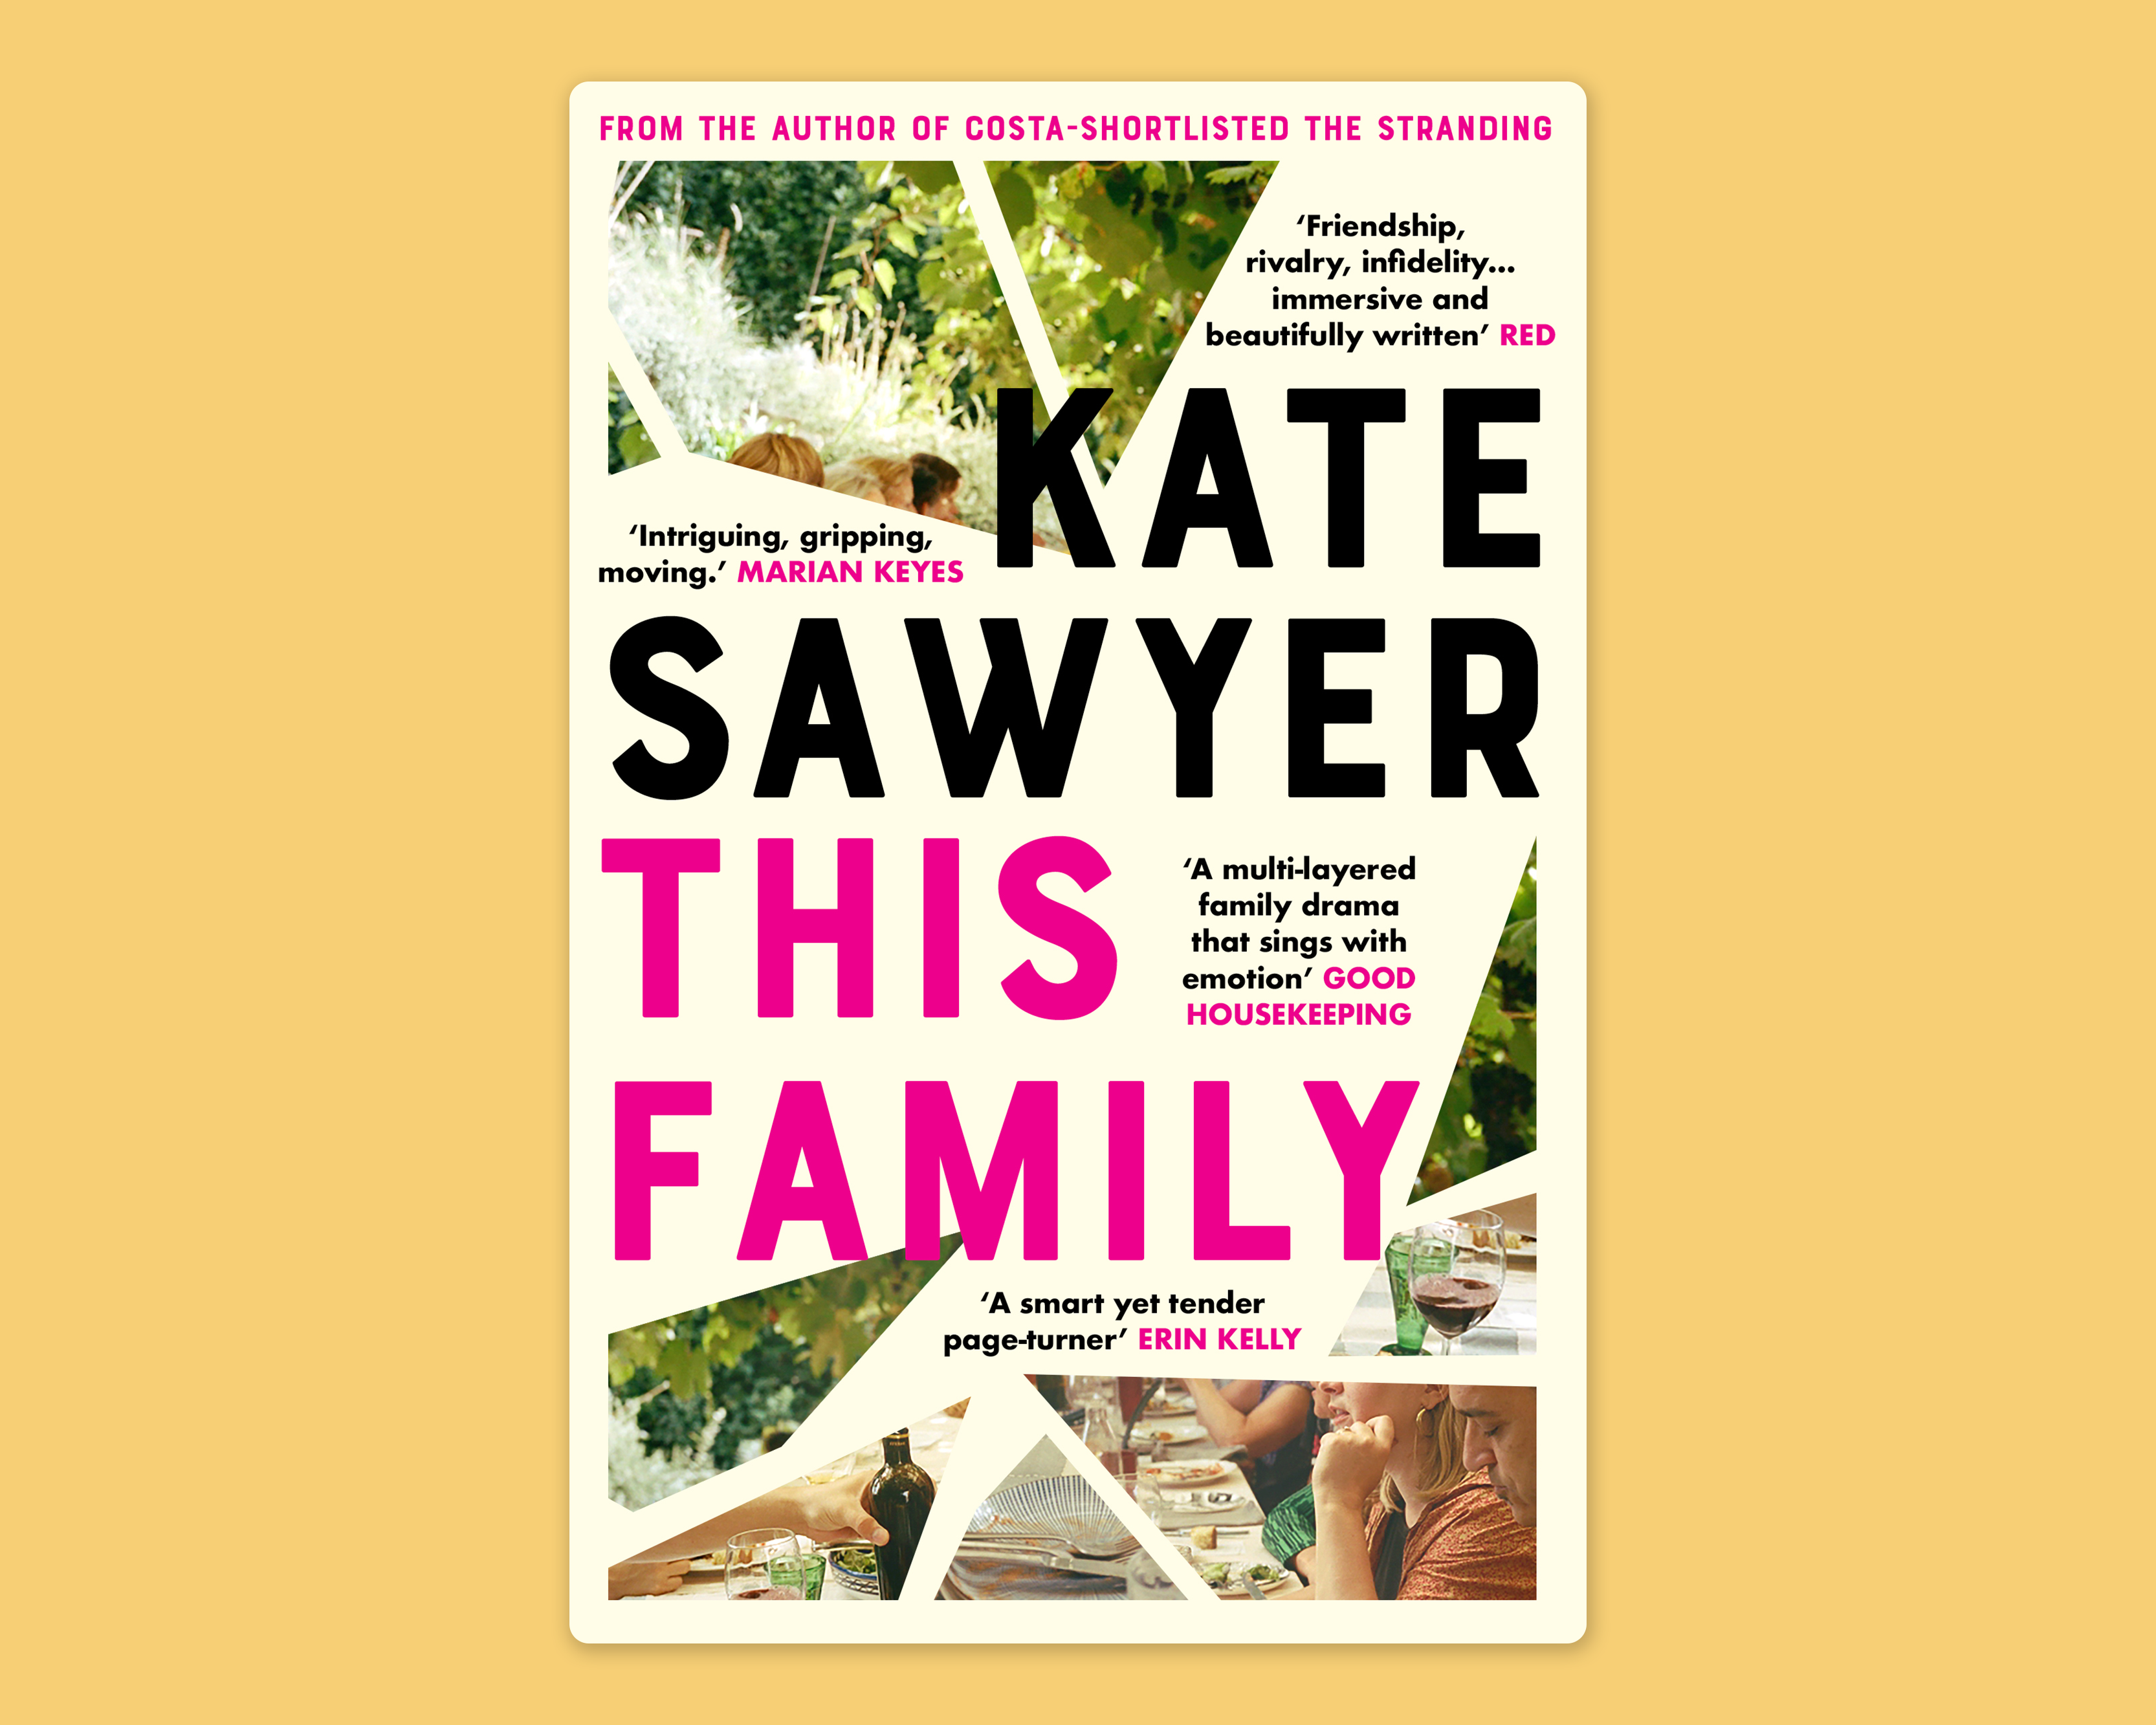 An image of the book cover, This Family by Kate Sawyer.